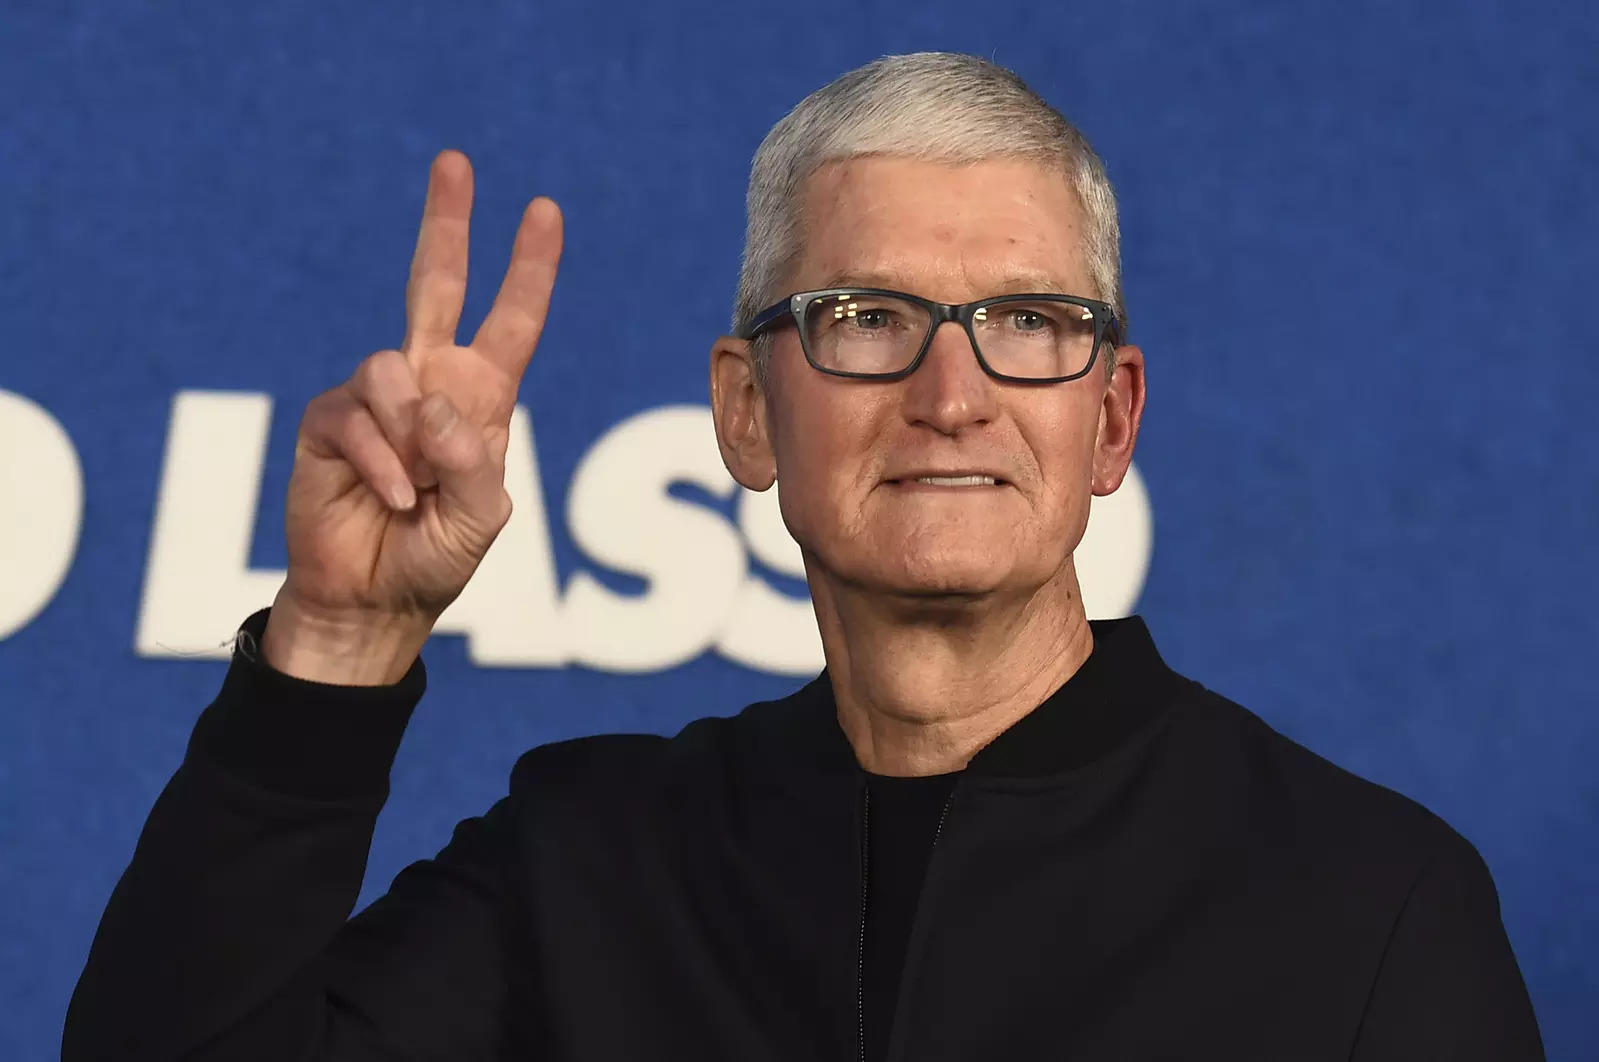 Tim Cook earned over 1,400 times the average Apple worker in 2021